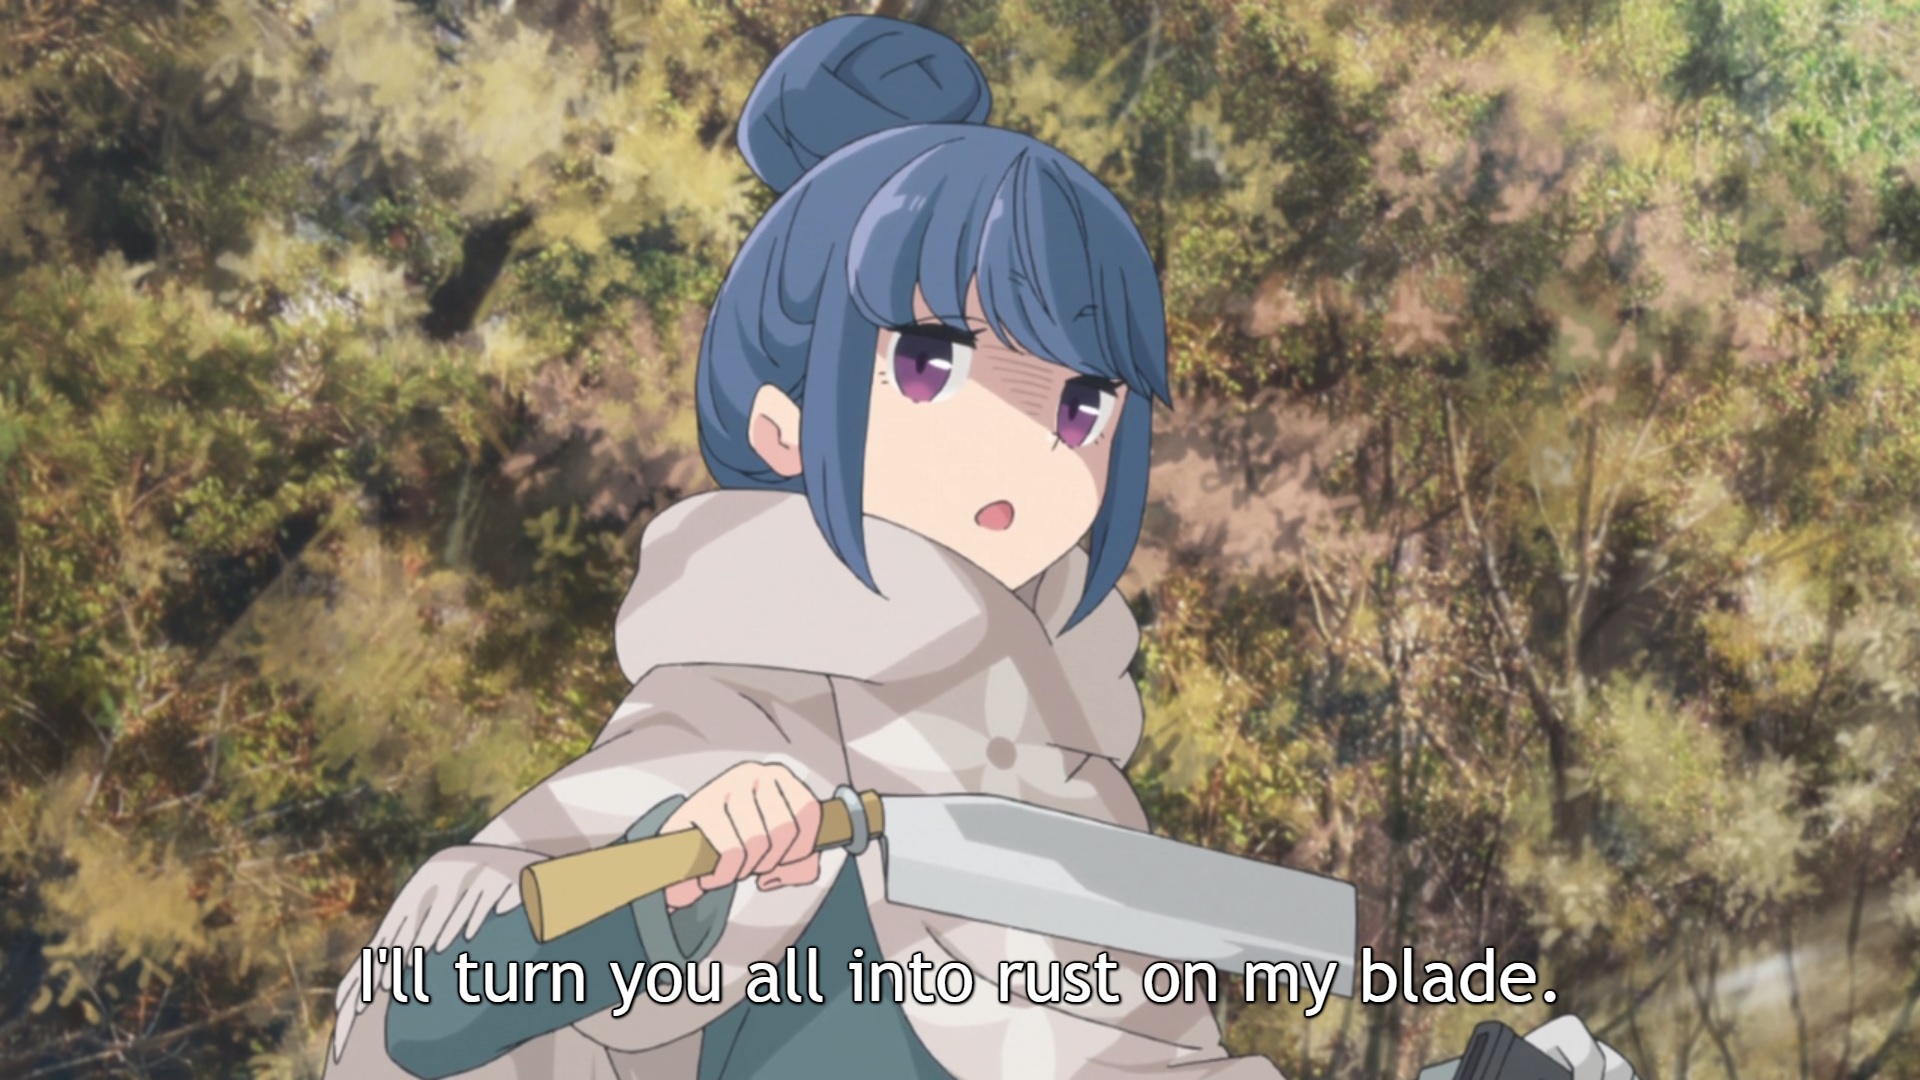 Rin from Laid-Back camp holding up a machete and saying “I’ll turn you all into rust on my blade.”